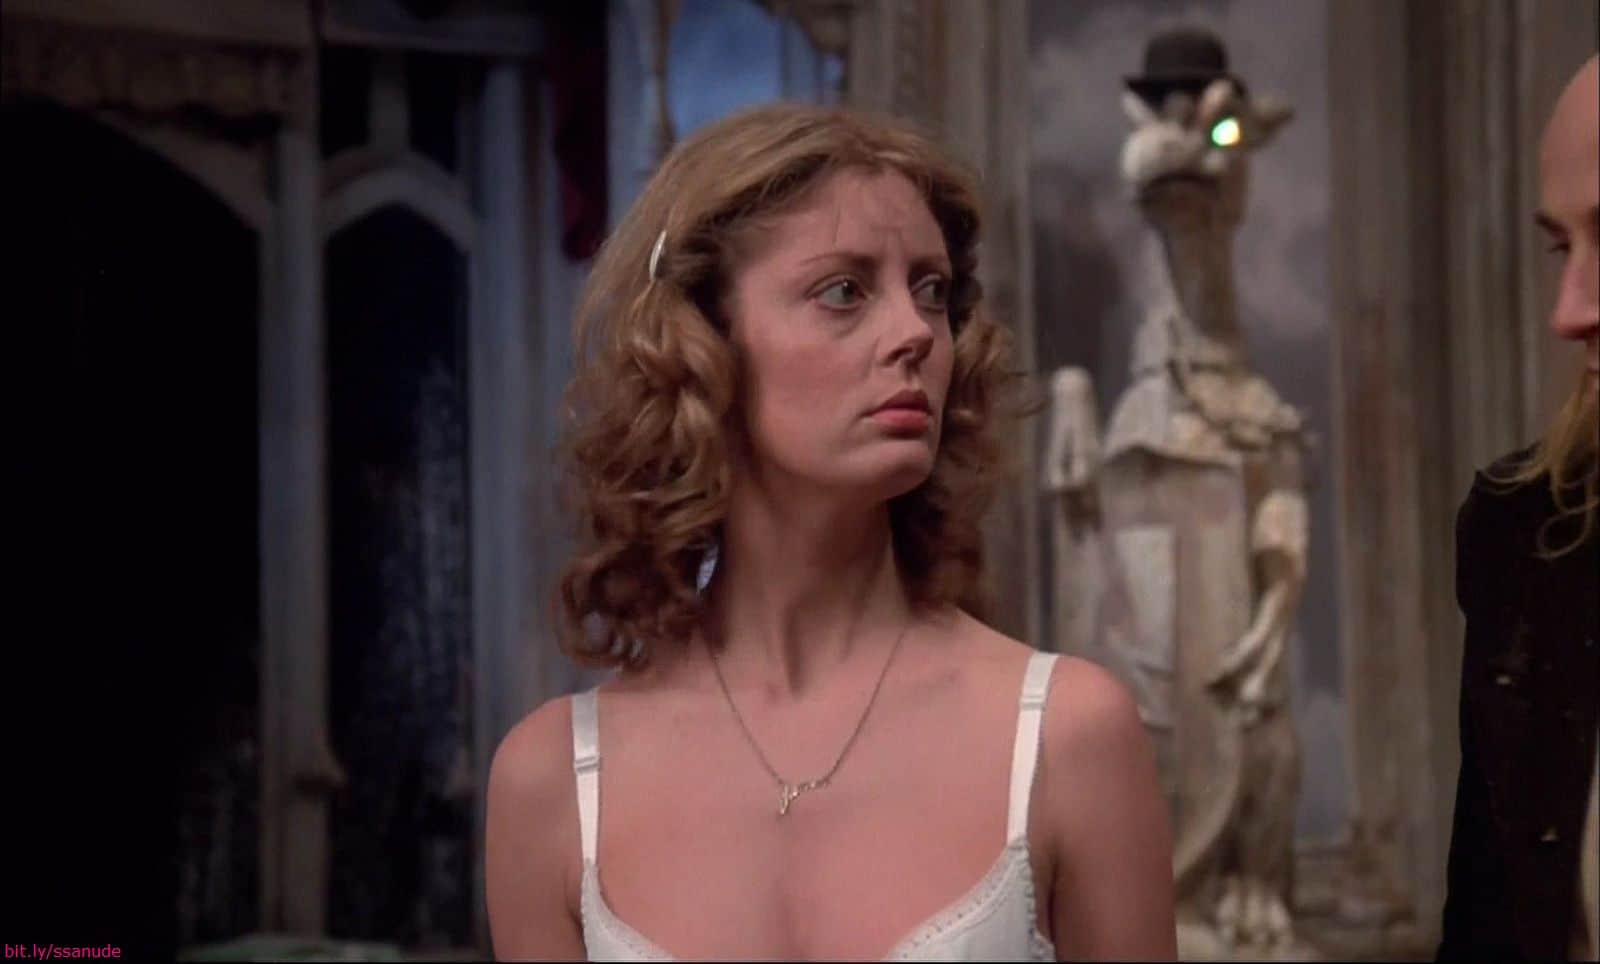 Susan Sarandon Nude is Everything You Ever Wanted (PICS)